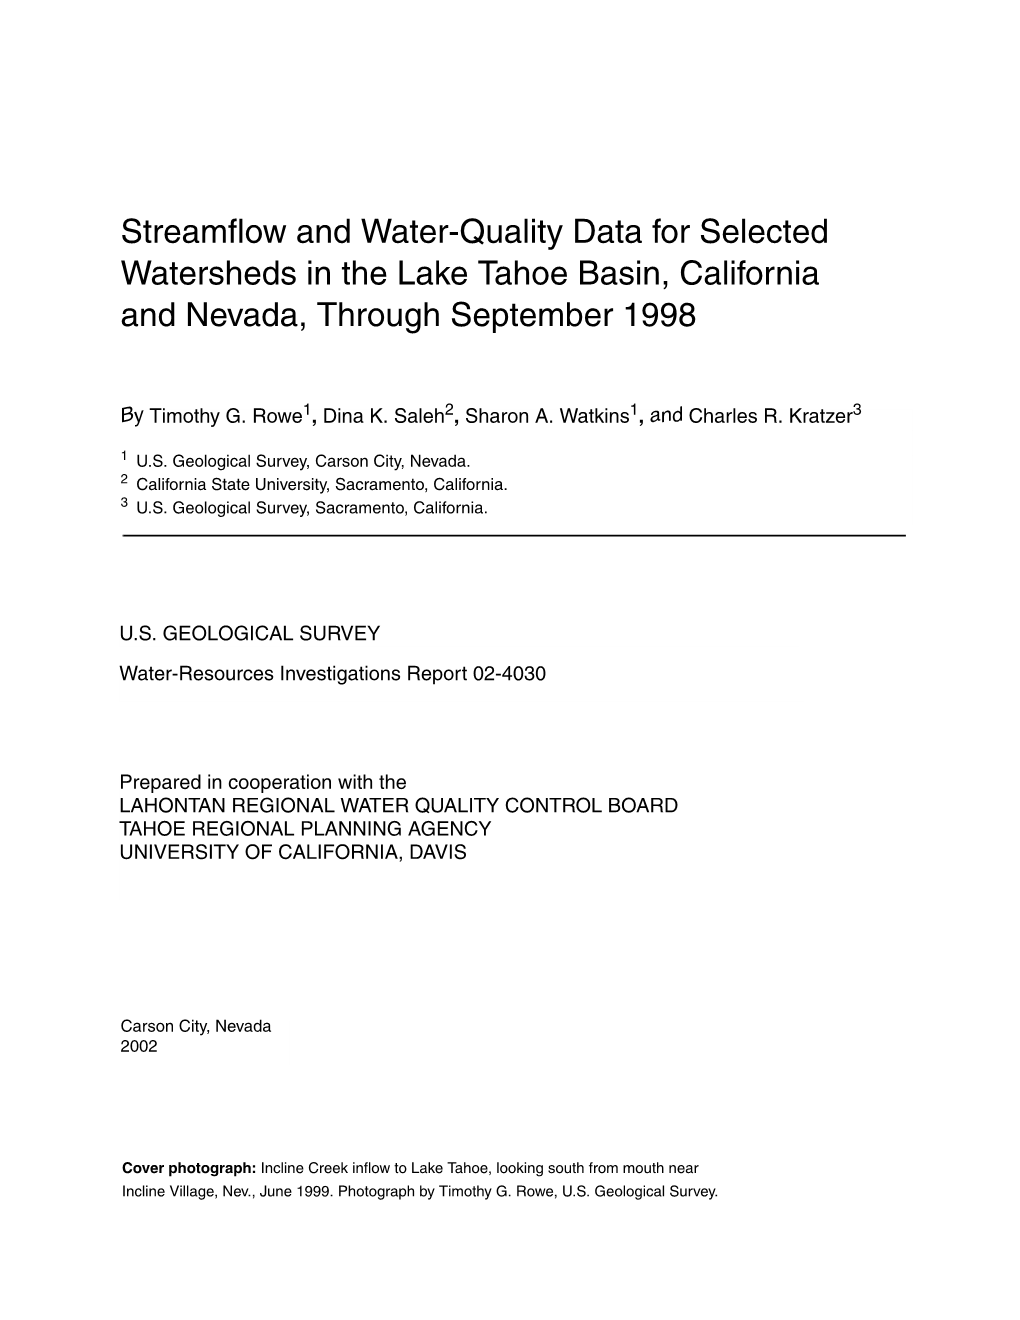 Streamflow and Water-Quality Data for Selected Watersheds in the Lake Tahoe Basin, California and Nevada, Through September 1998